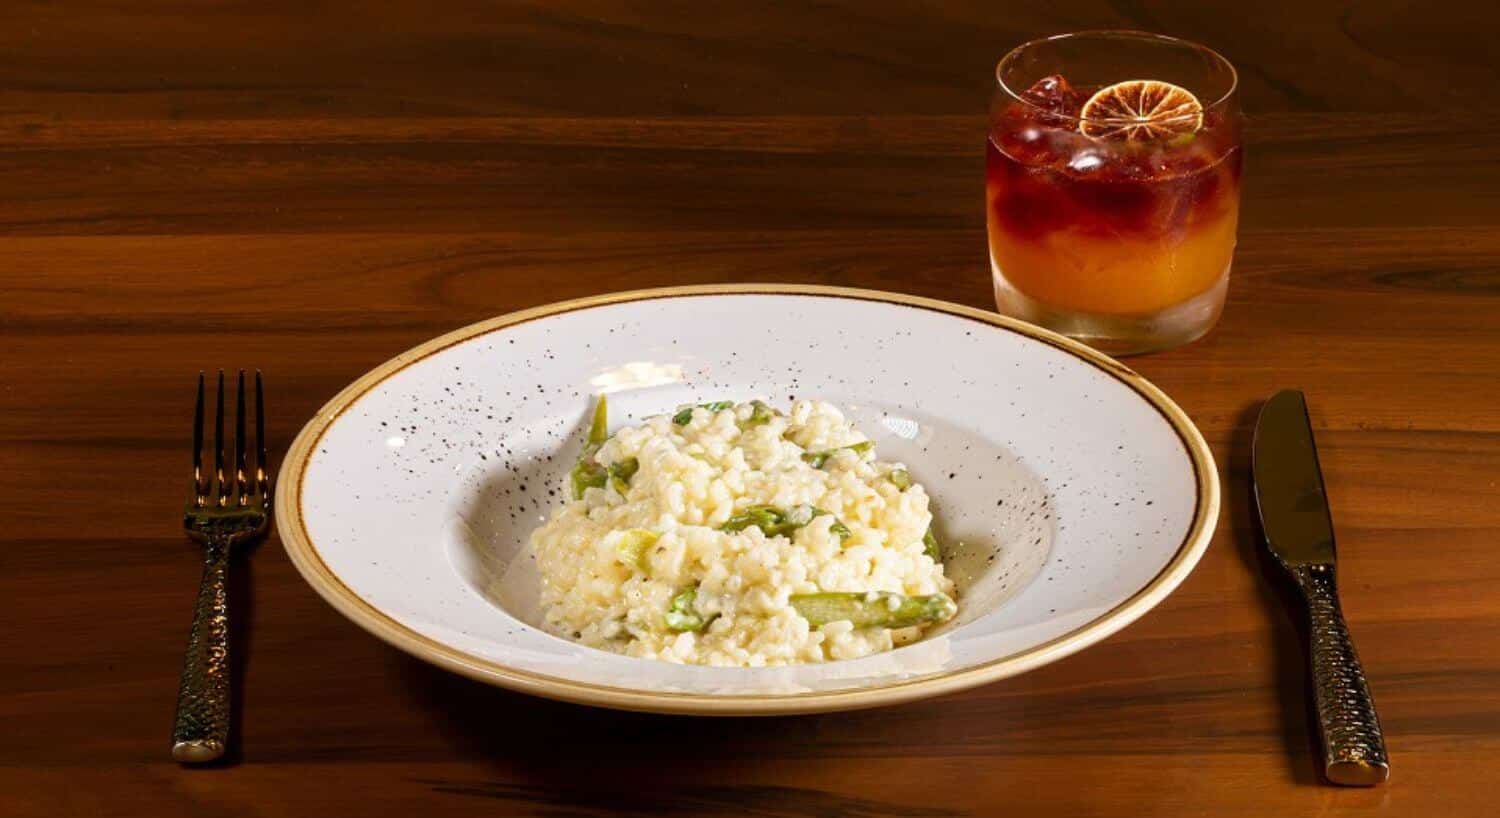 A white bowl of cooked white risotto with sprigs of cooked asparagus mixed in; along with silverware on either side, and a clear glass with an orange and brown cocktail with a dried lime slice on top.